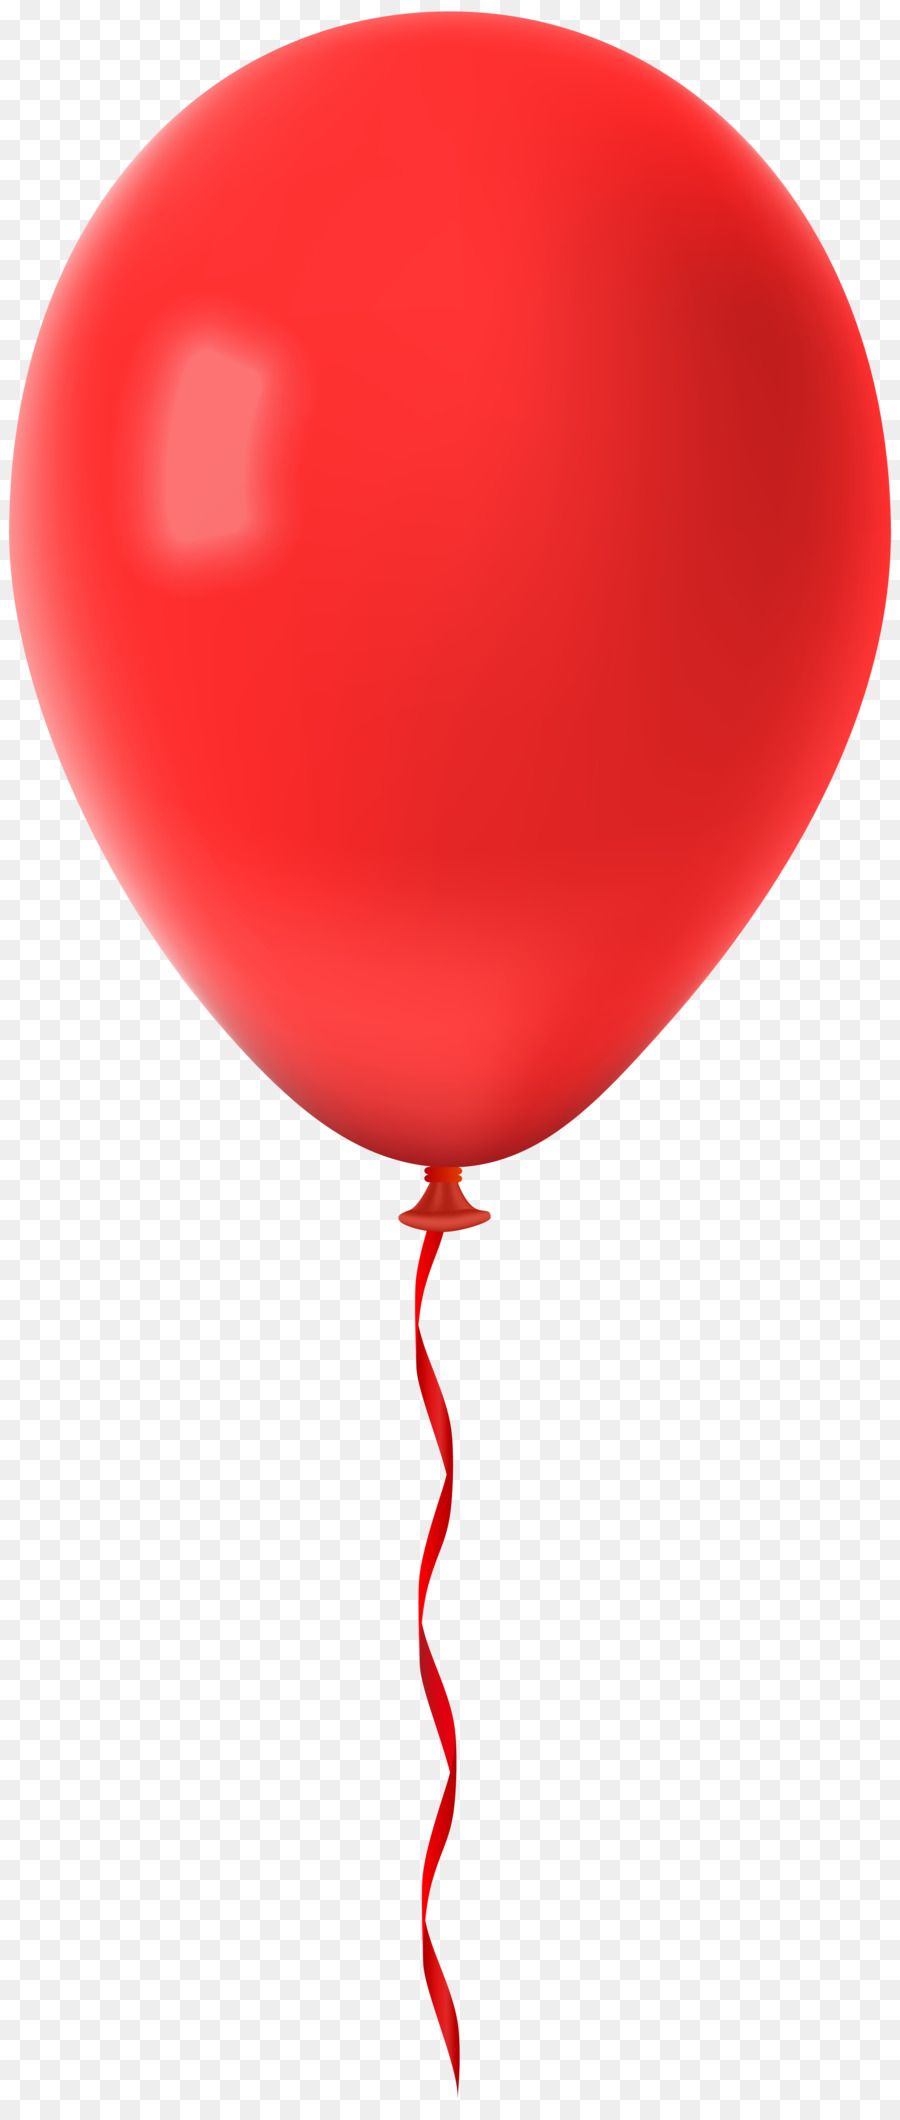 Clip art Balloon Image Openclipart Portable Network Graphics - red balloon dog png download - 3420*8000 - Free Transparent Balloon png Download.